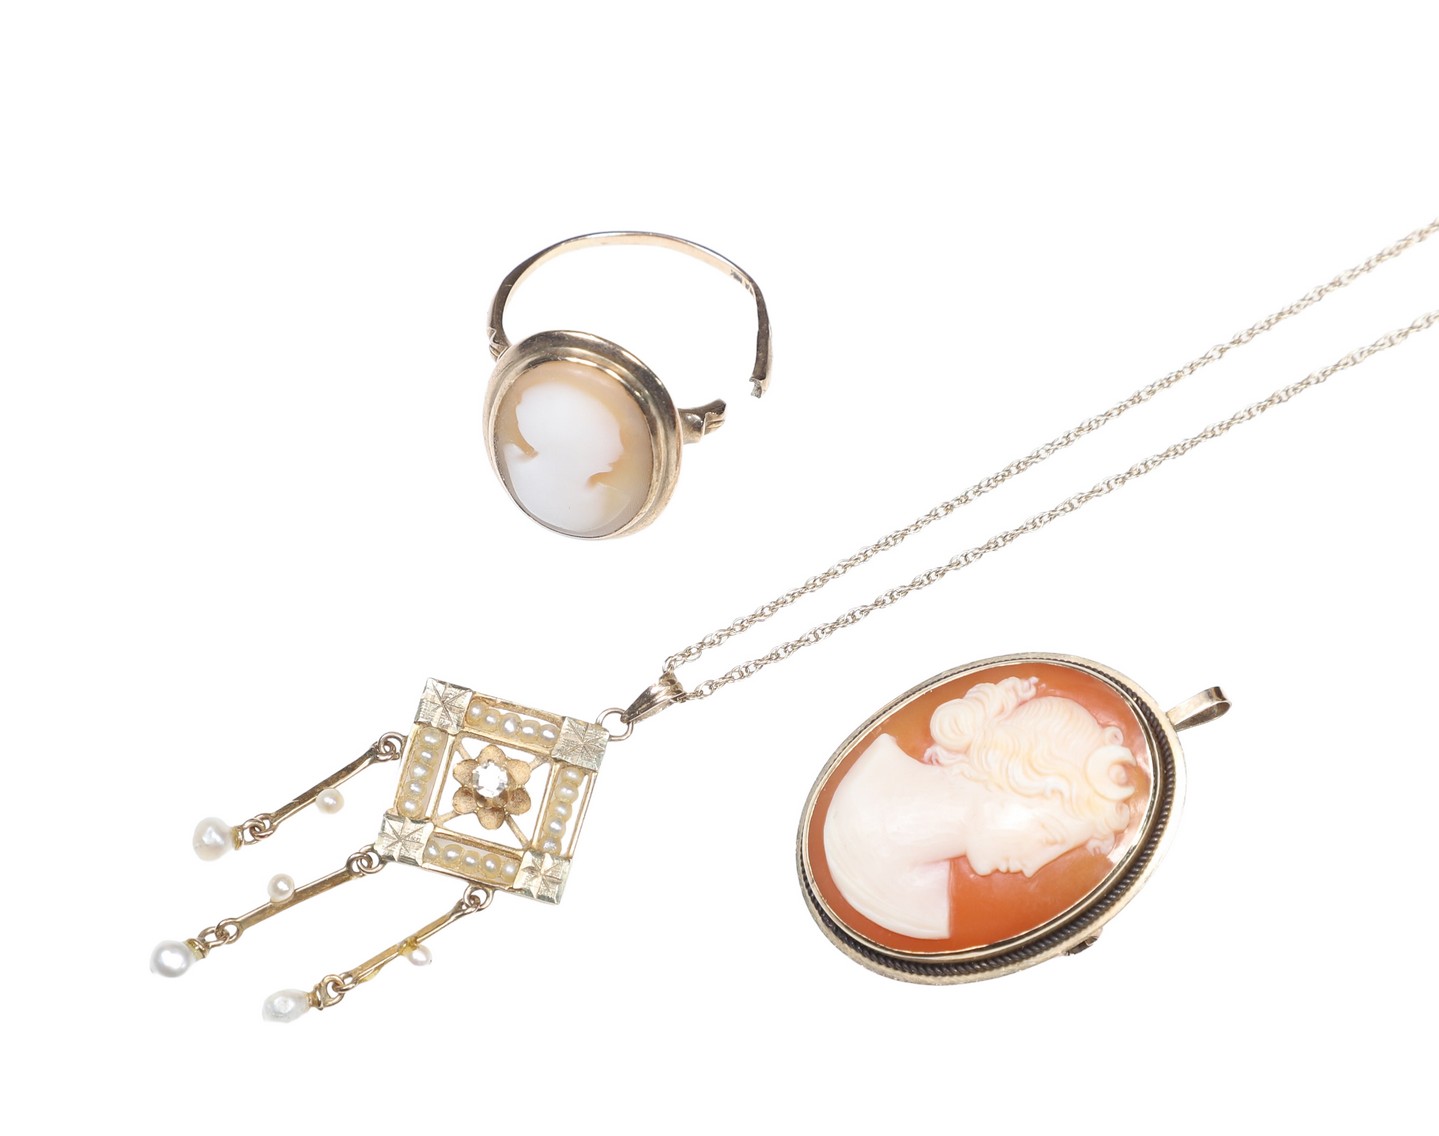 Cameo ring, pin and pendant necklace